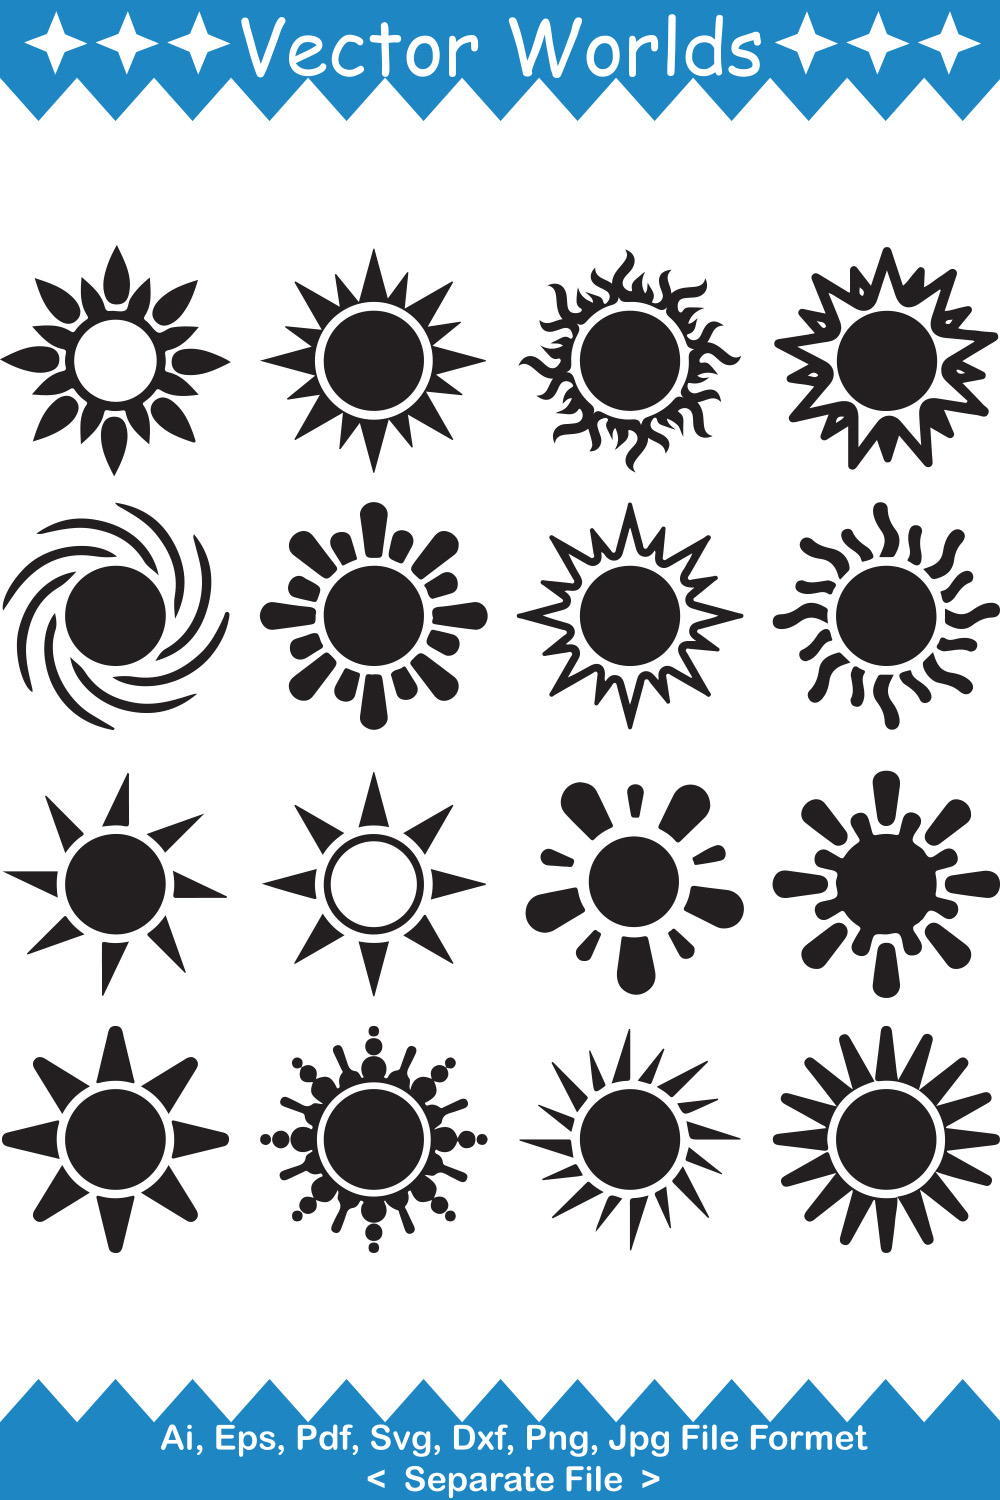 Bundle of vector enchanting images of silhouettes of the sun.